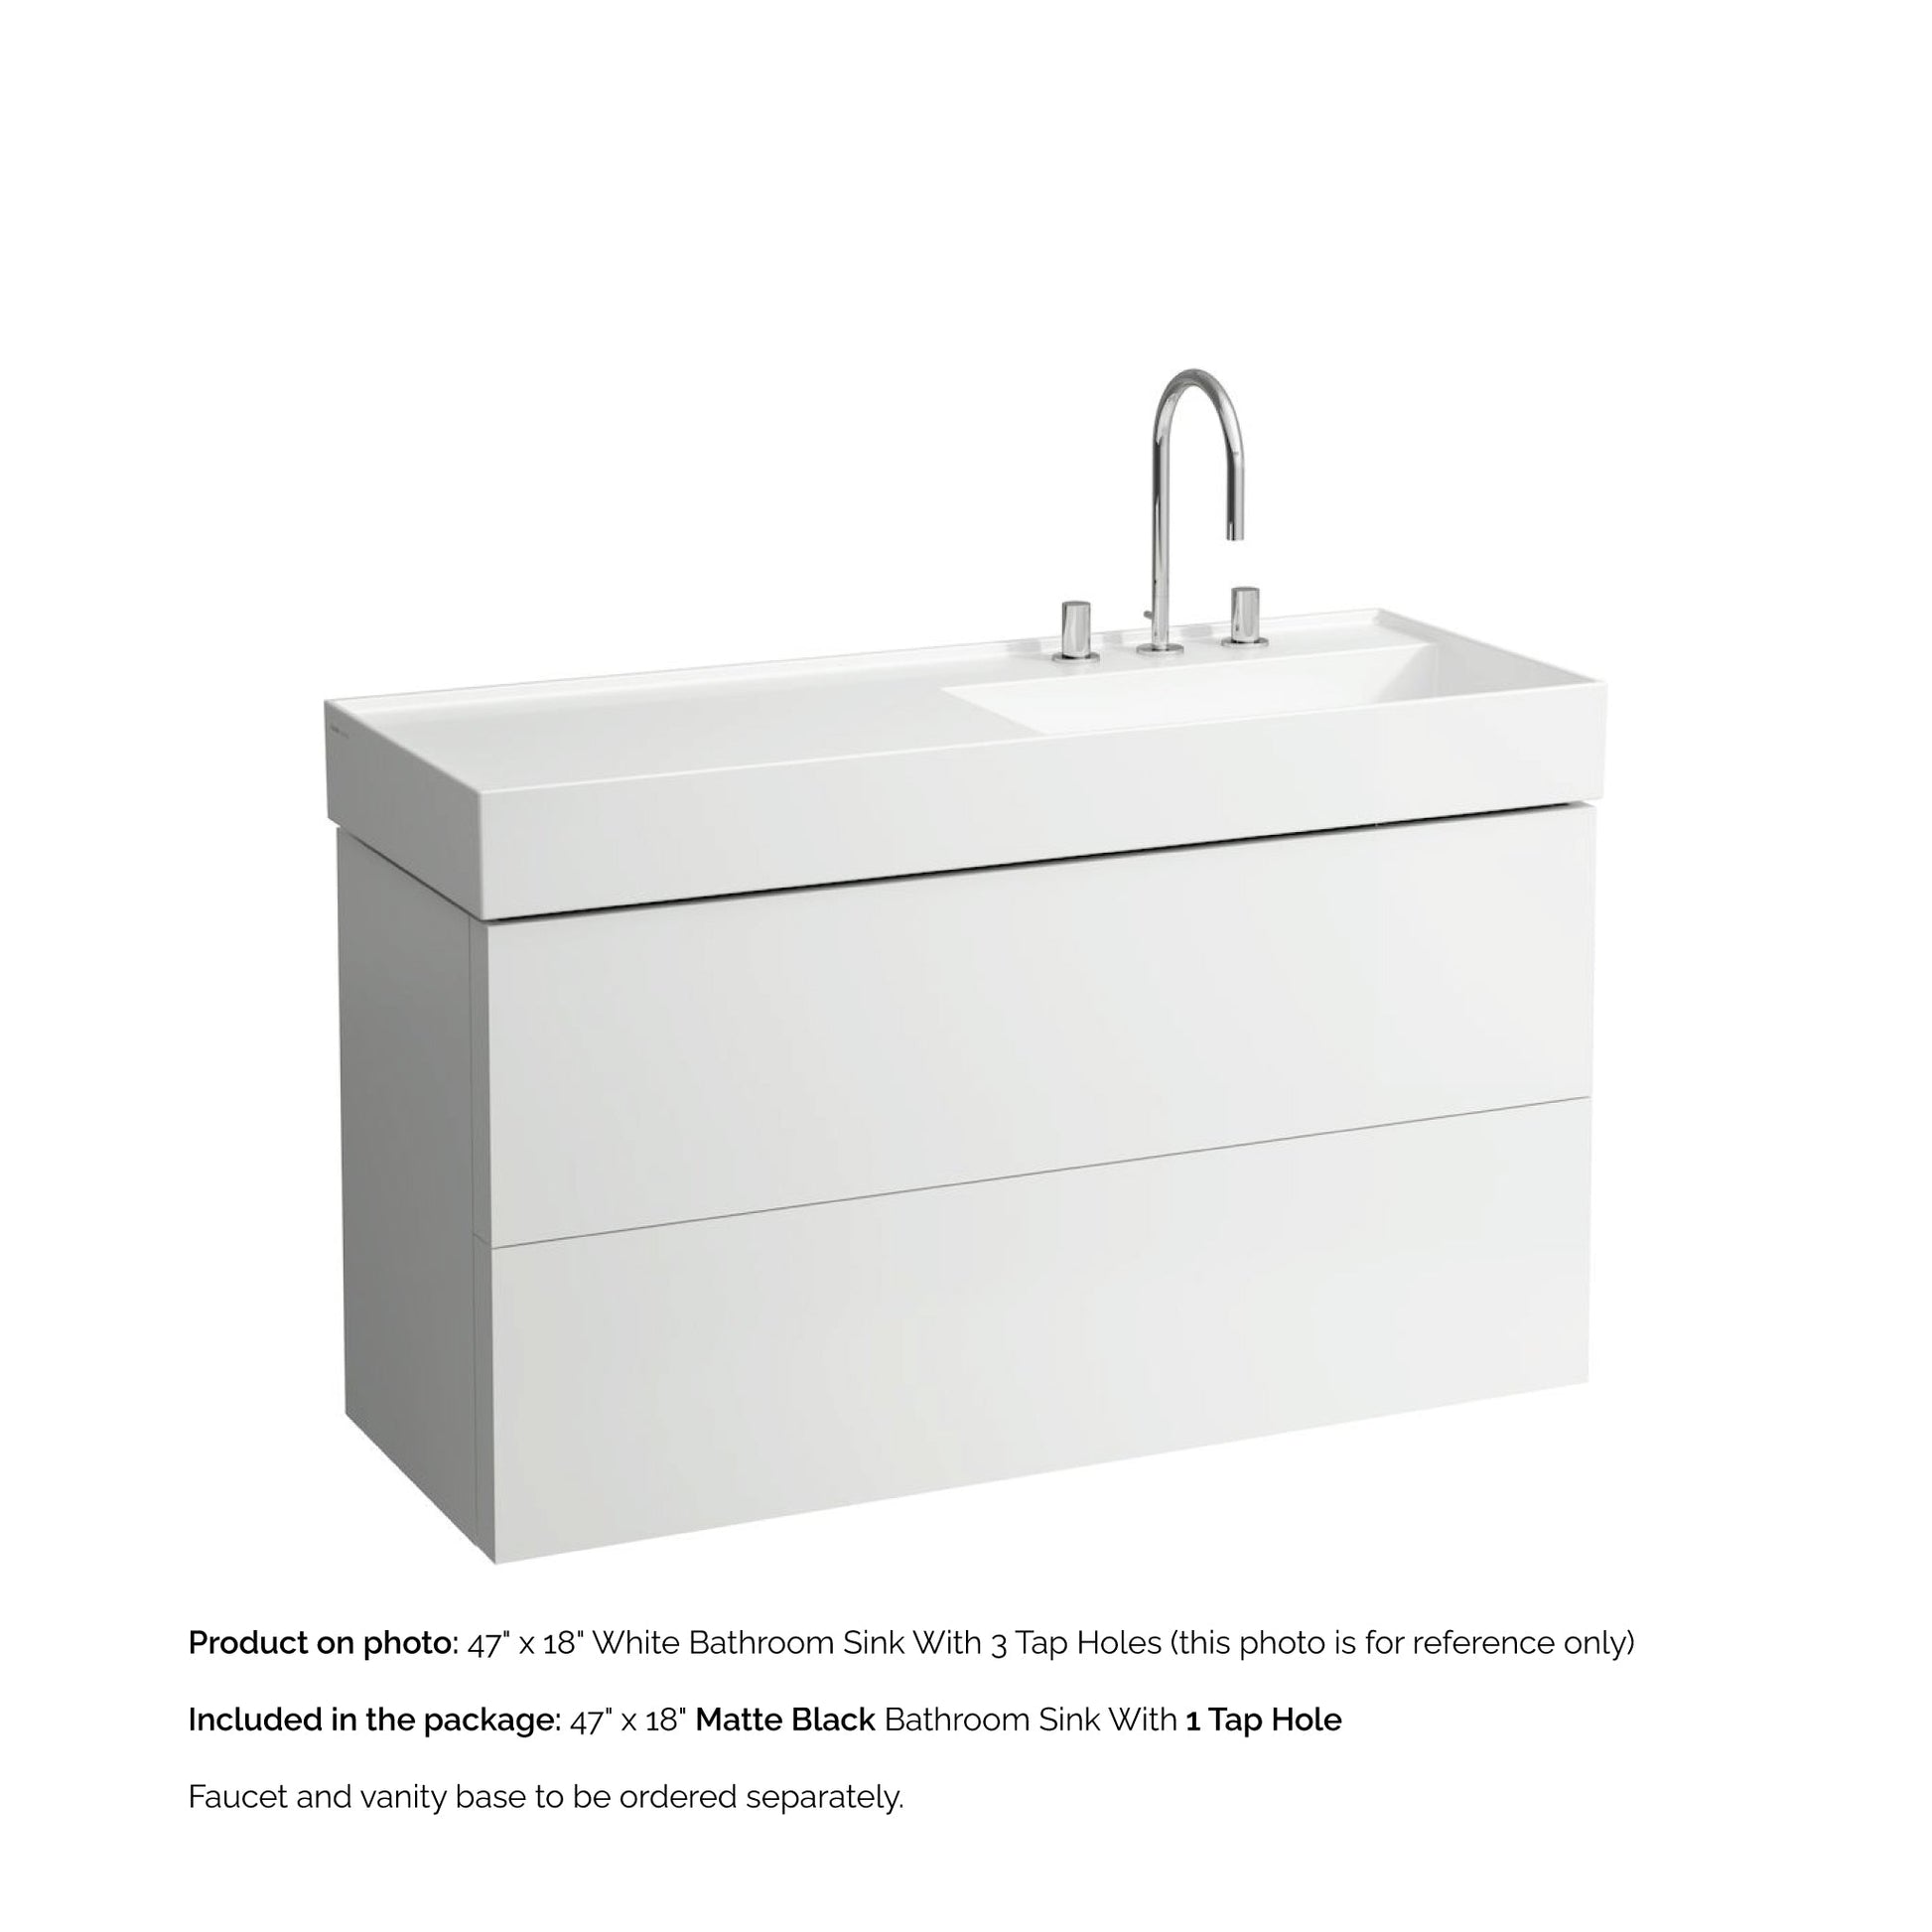 Laufen Kartell 47" x 18" Matte Black Wall-Mounted Shelf-Left Bathroom Sink With Faucet Hole